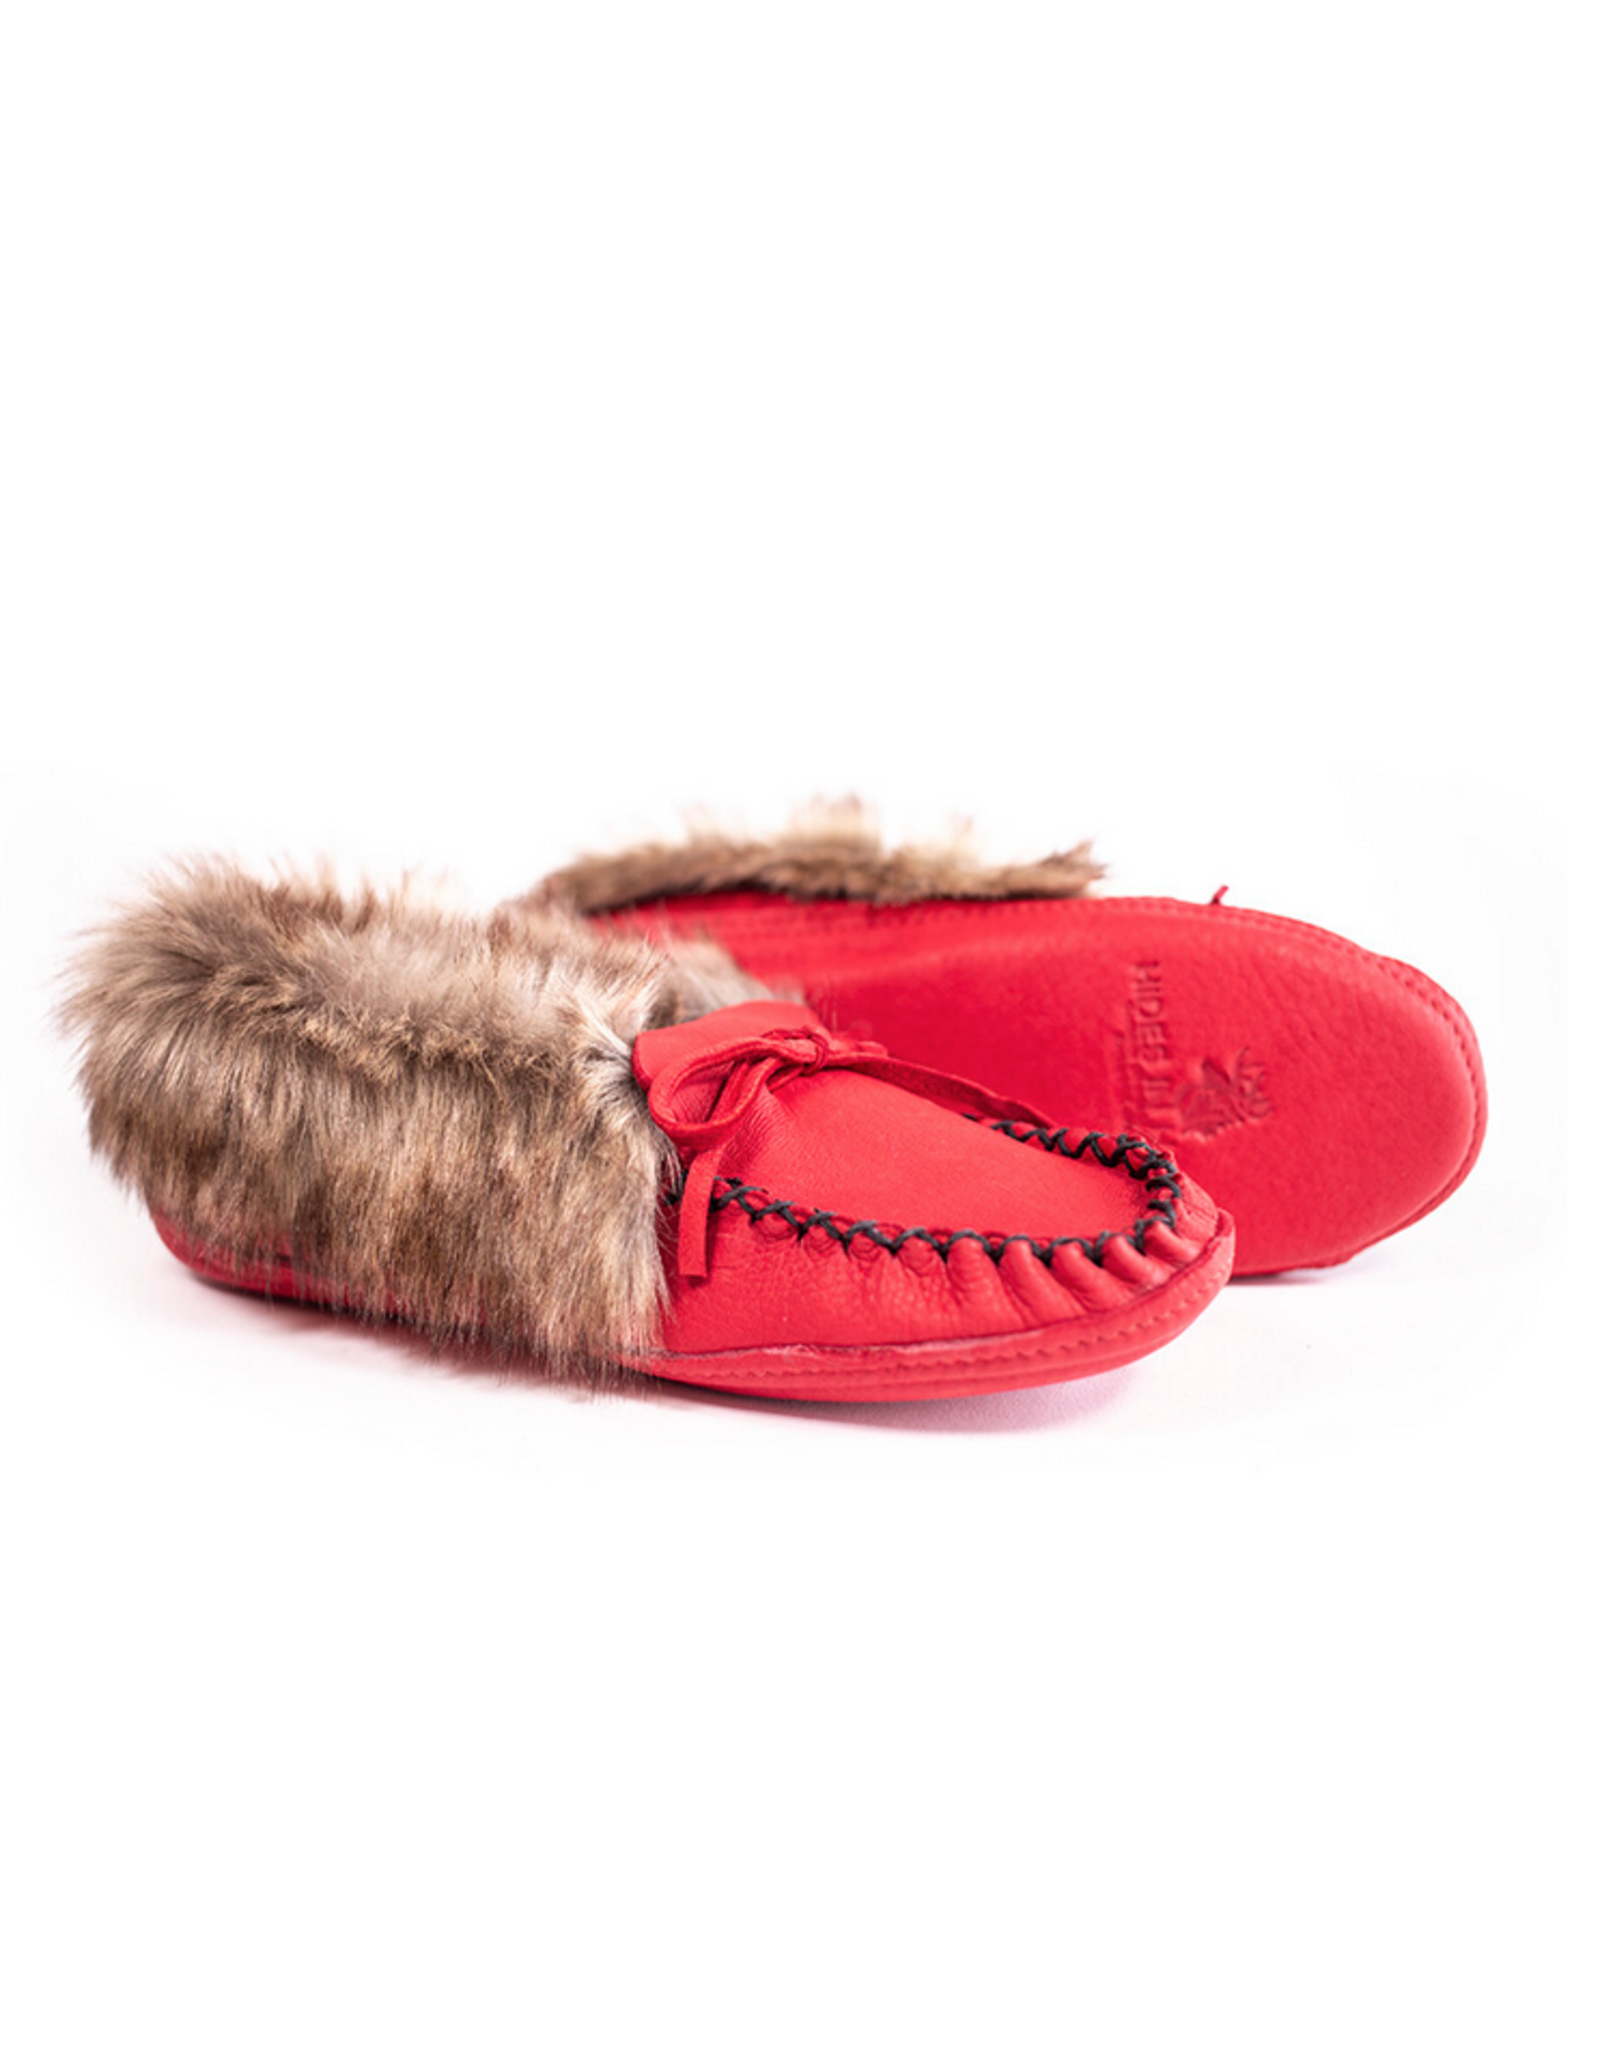 Deer Hide Moccasin Red with Faux Fur